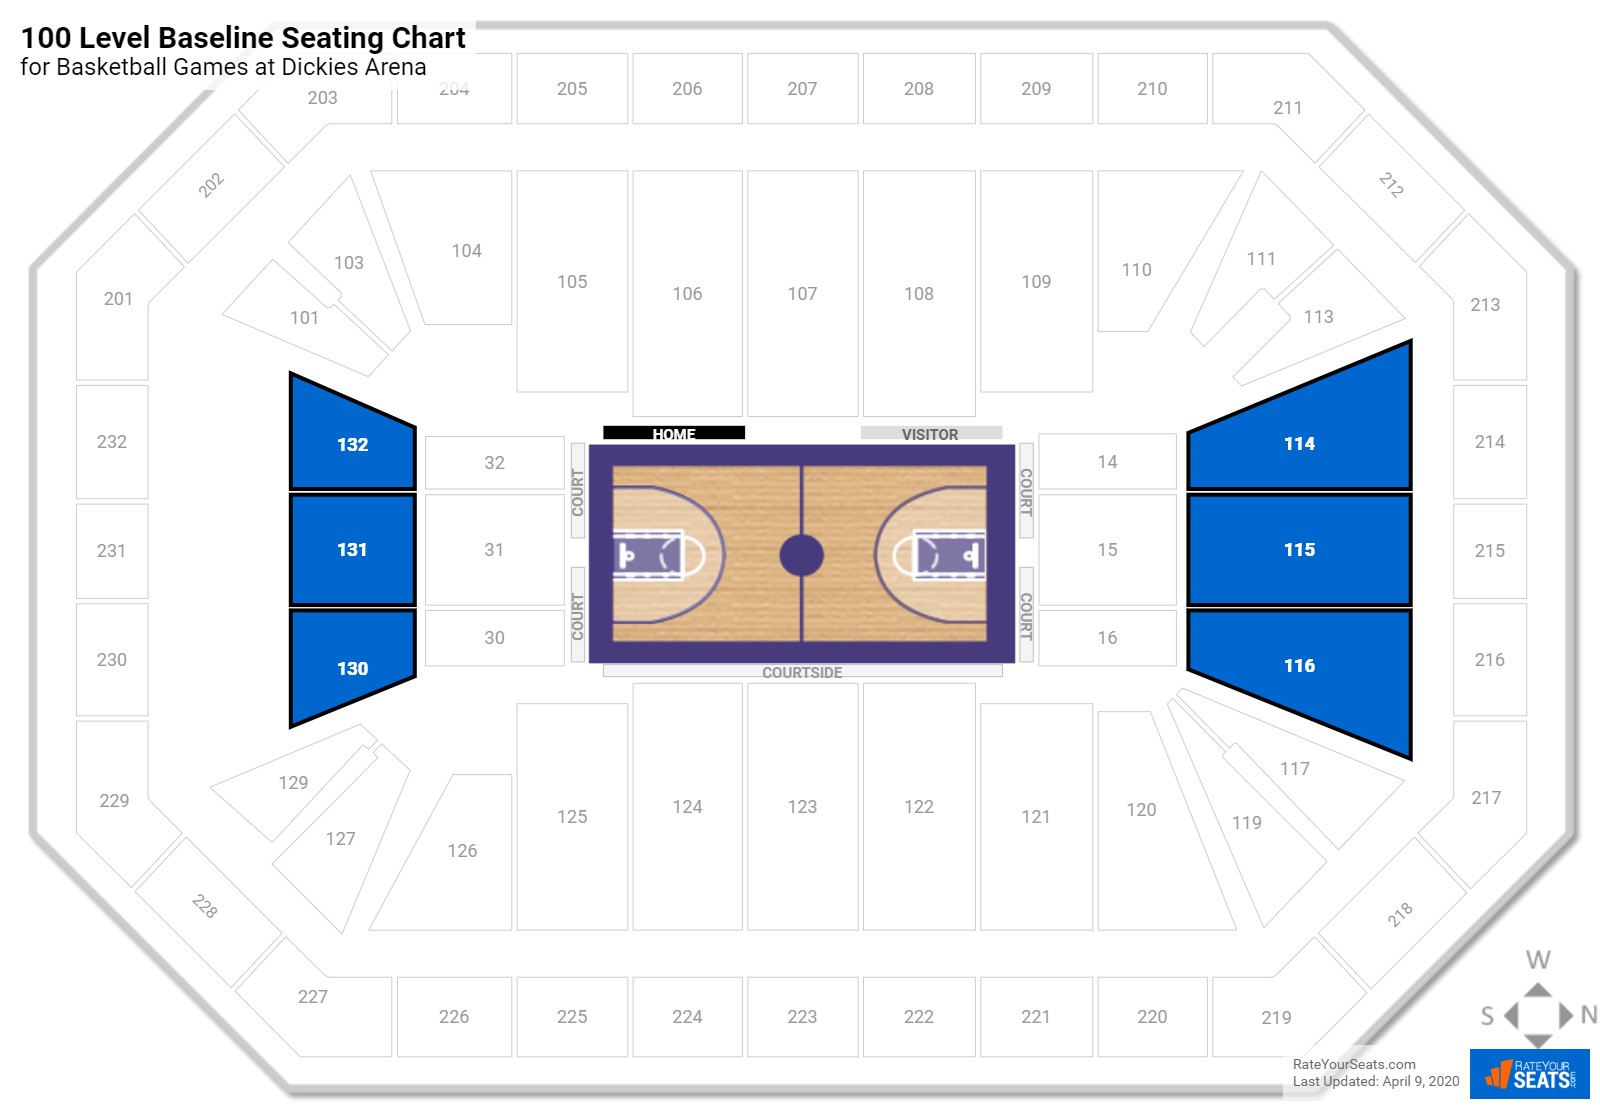 Dickies Arena Seating Chart With Seat Numbers